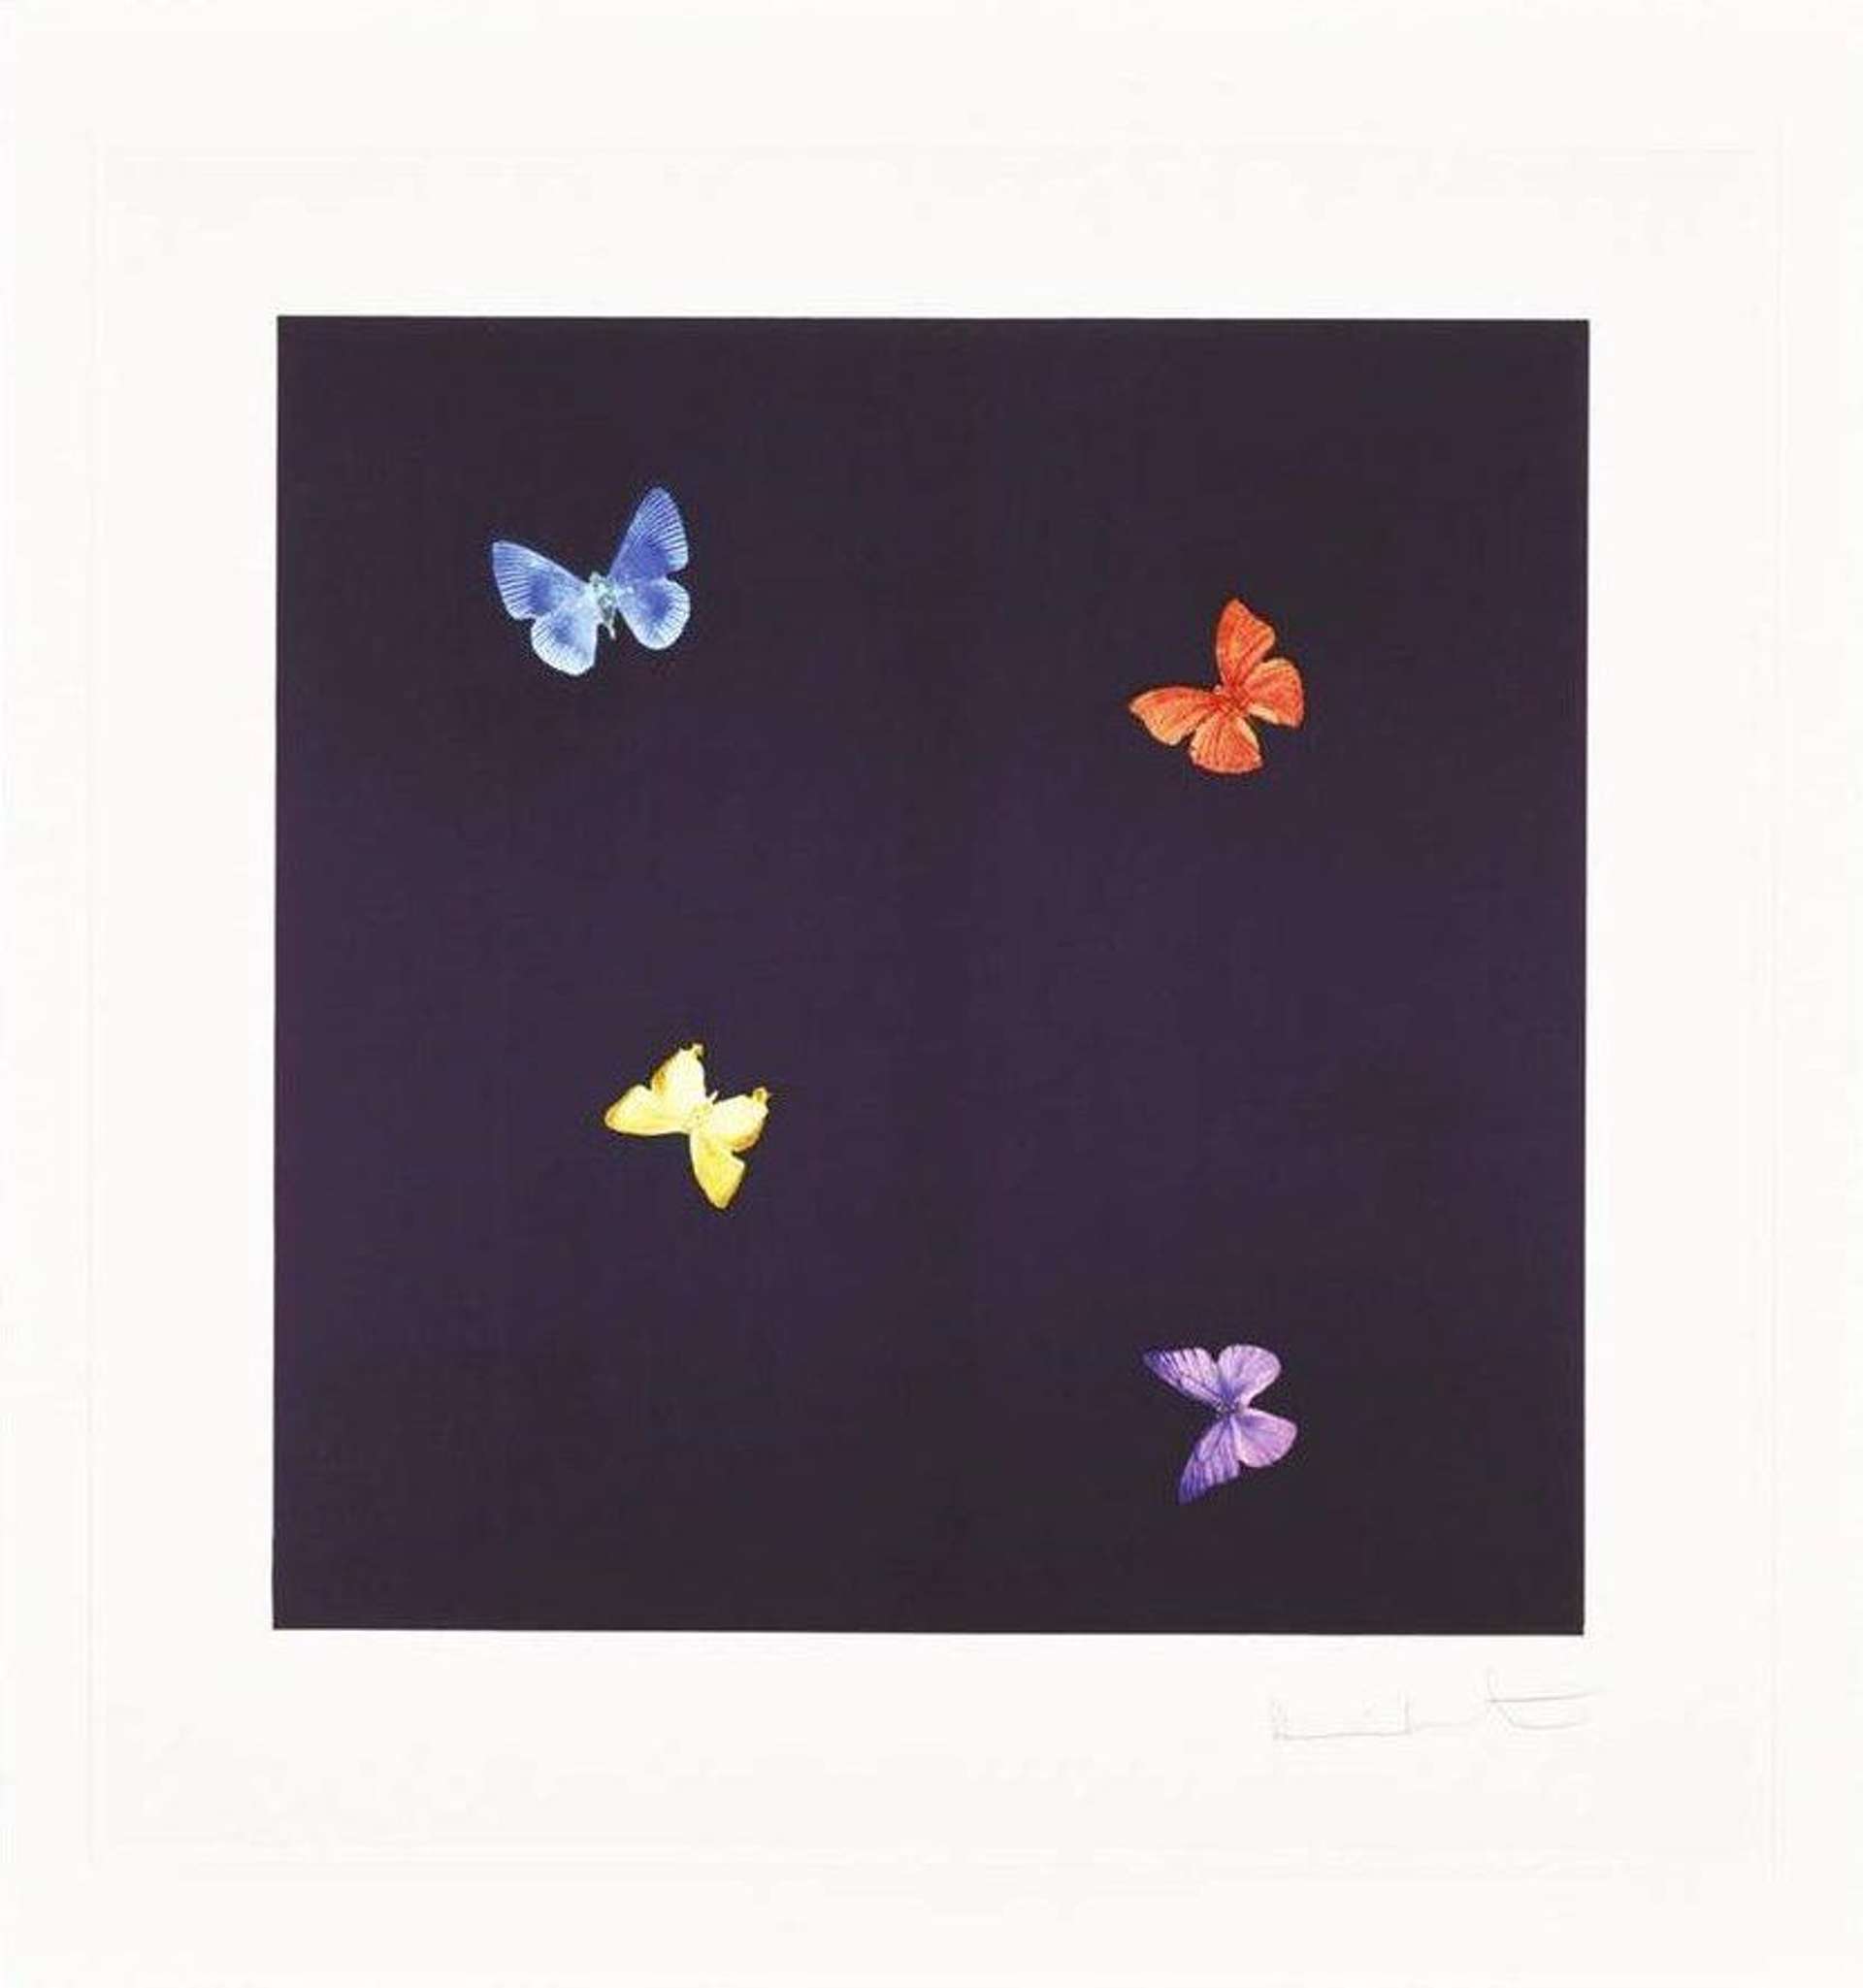 Damien Hirst: To A Stranger - Signed Mixed Media